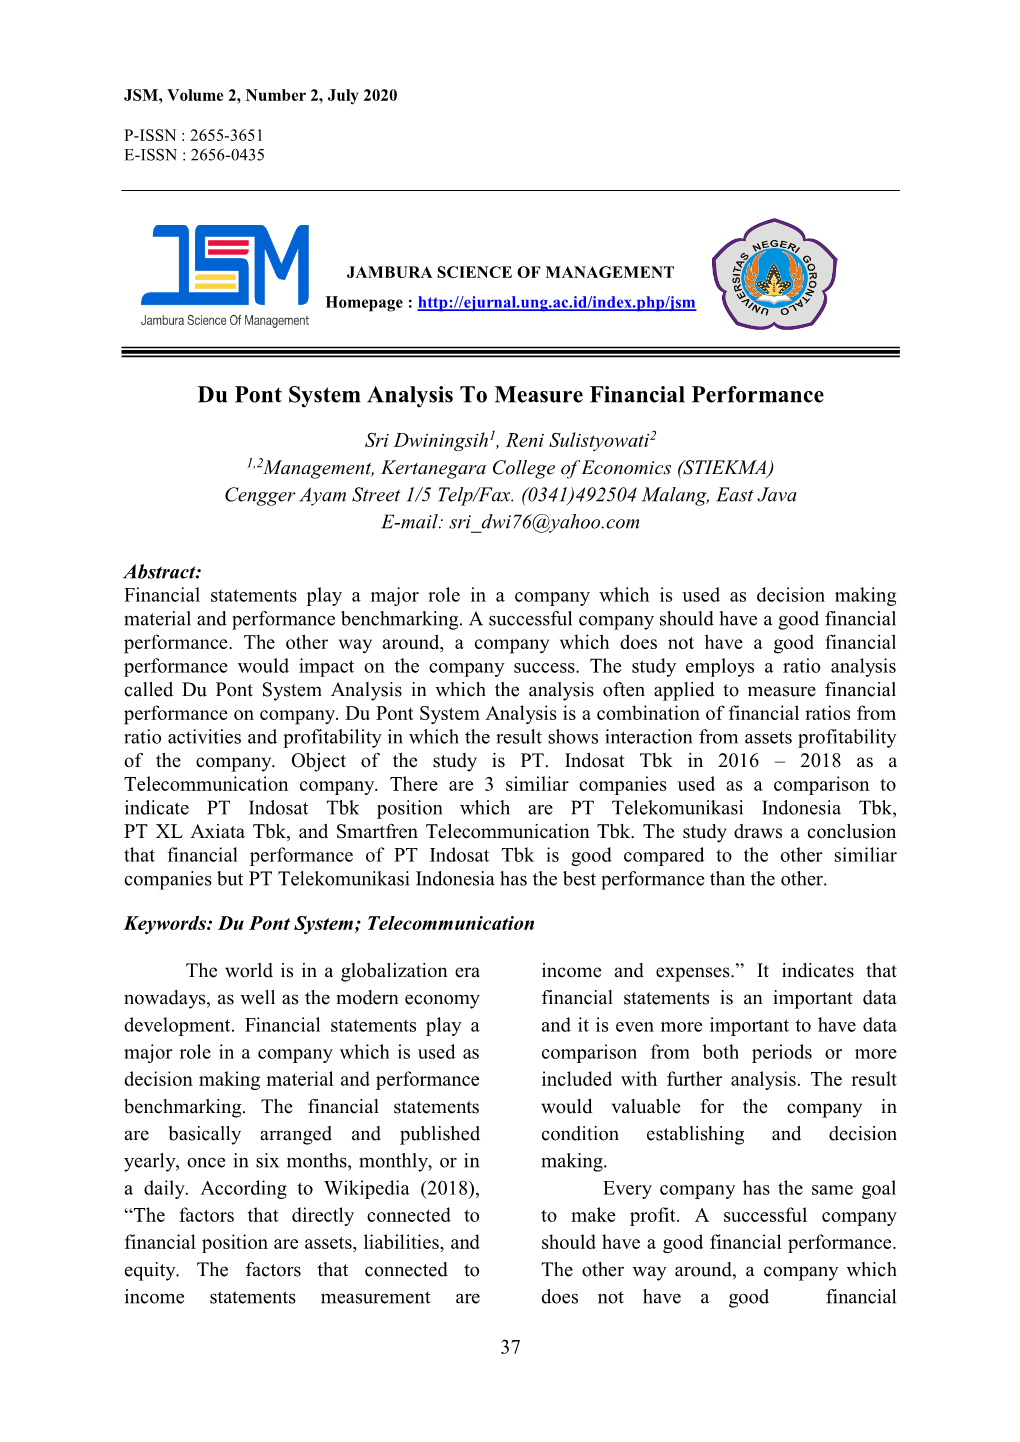 Du Pont System Analysis to Measure Financial Performance